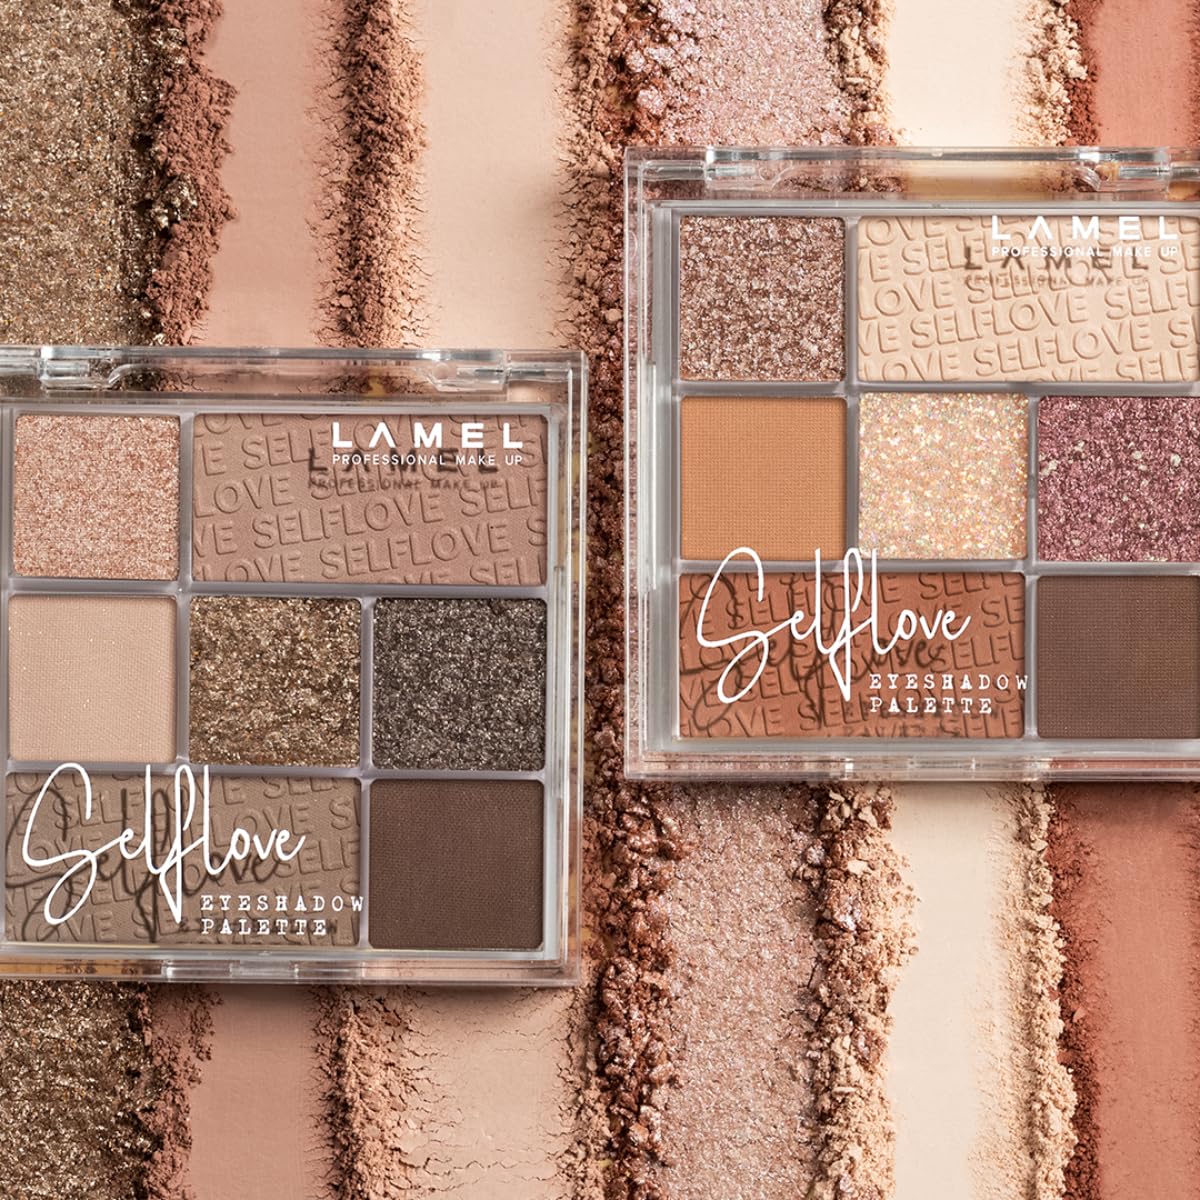 Lamel- SELFLOVE Eyeshadow Palette 401-Multi |Easily create beautiful looks |Soft, blendable texture |Matte, shiny, and pearlescent shades |No creasing or crumbling |8.5gm